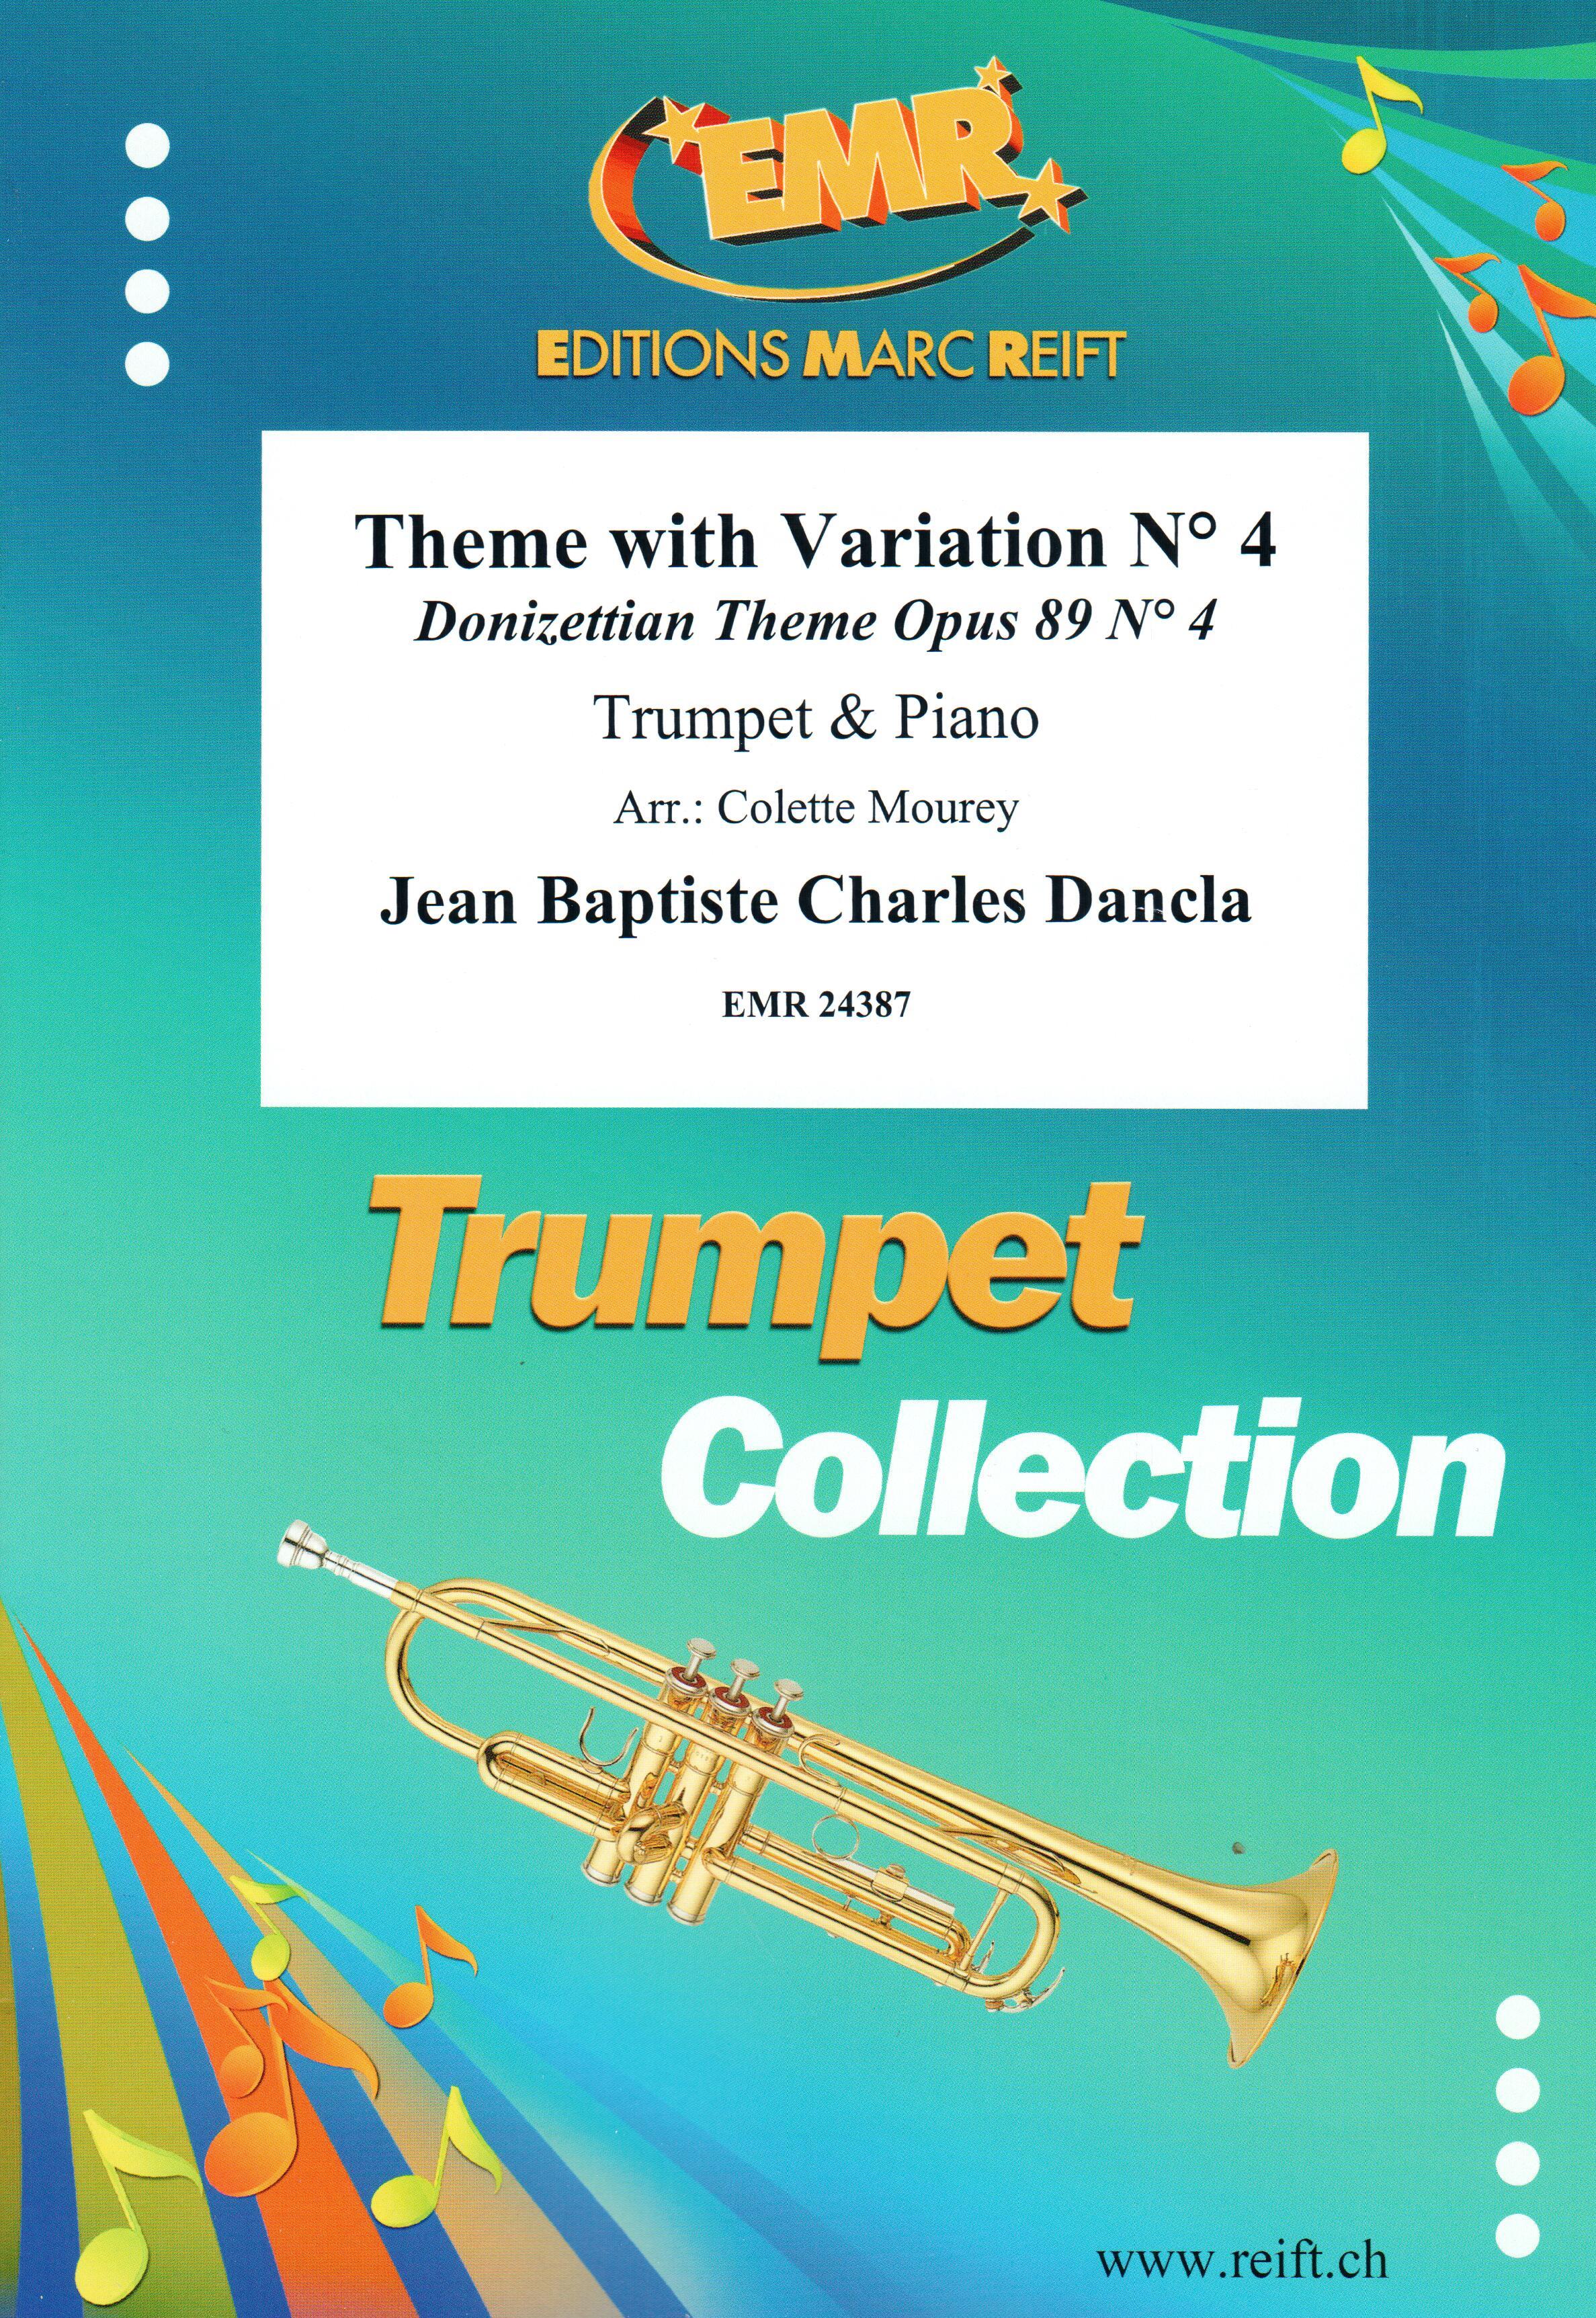 THEME WITH VARIATIONS N° 4, SOLOS - B♭. Cornet/Trumpet with Piano